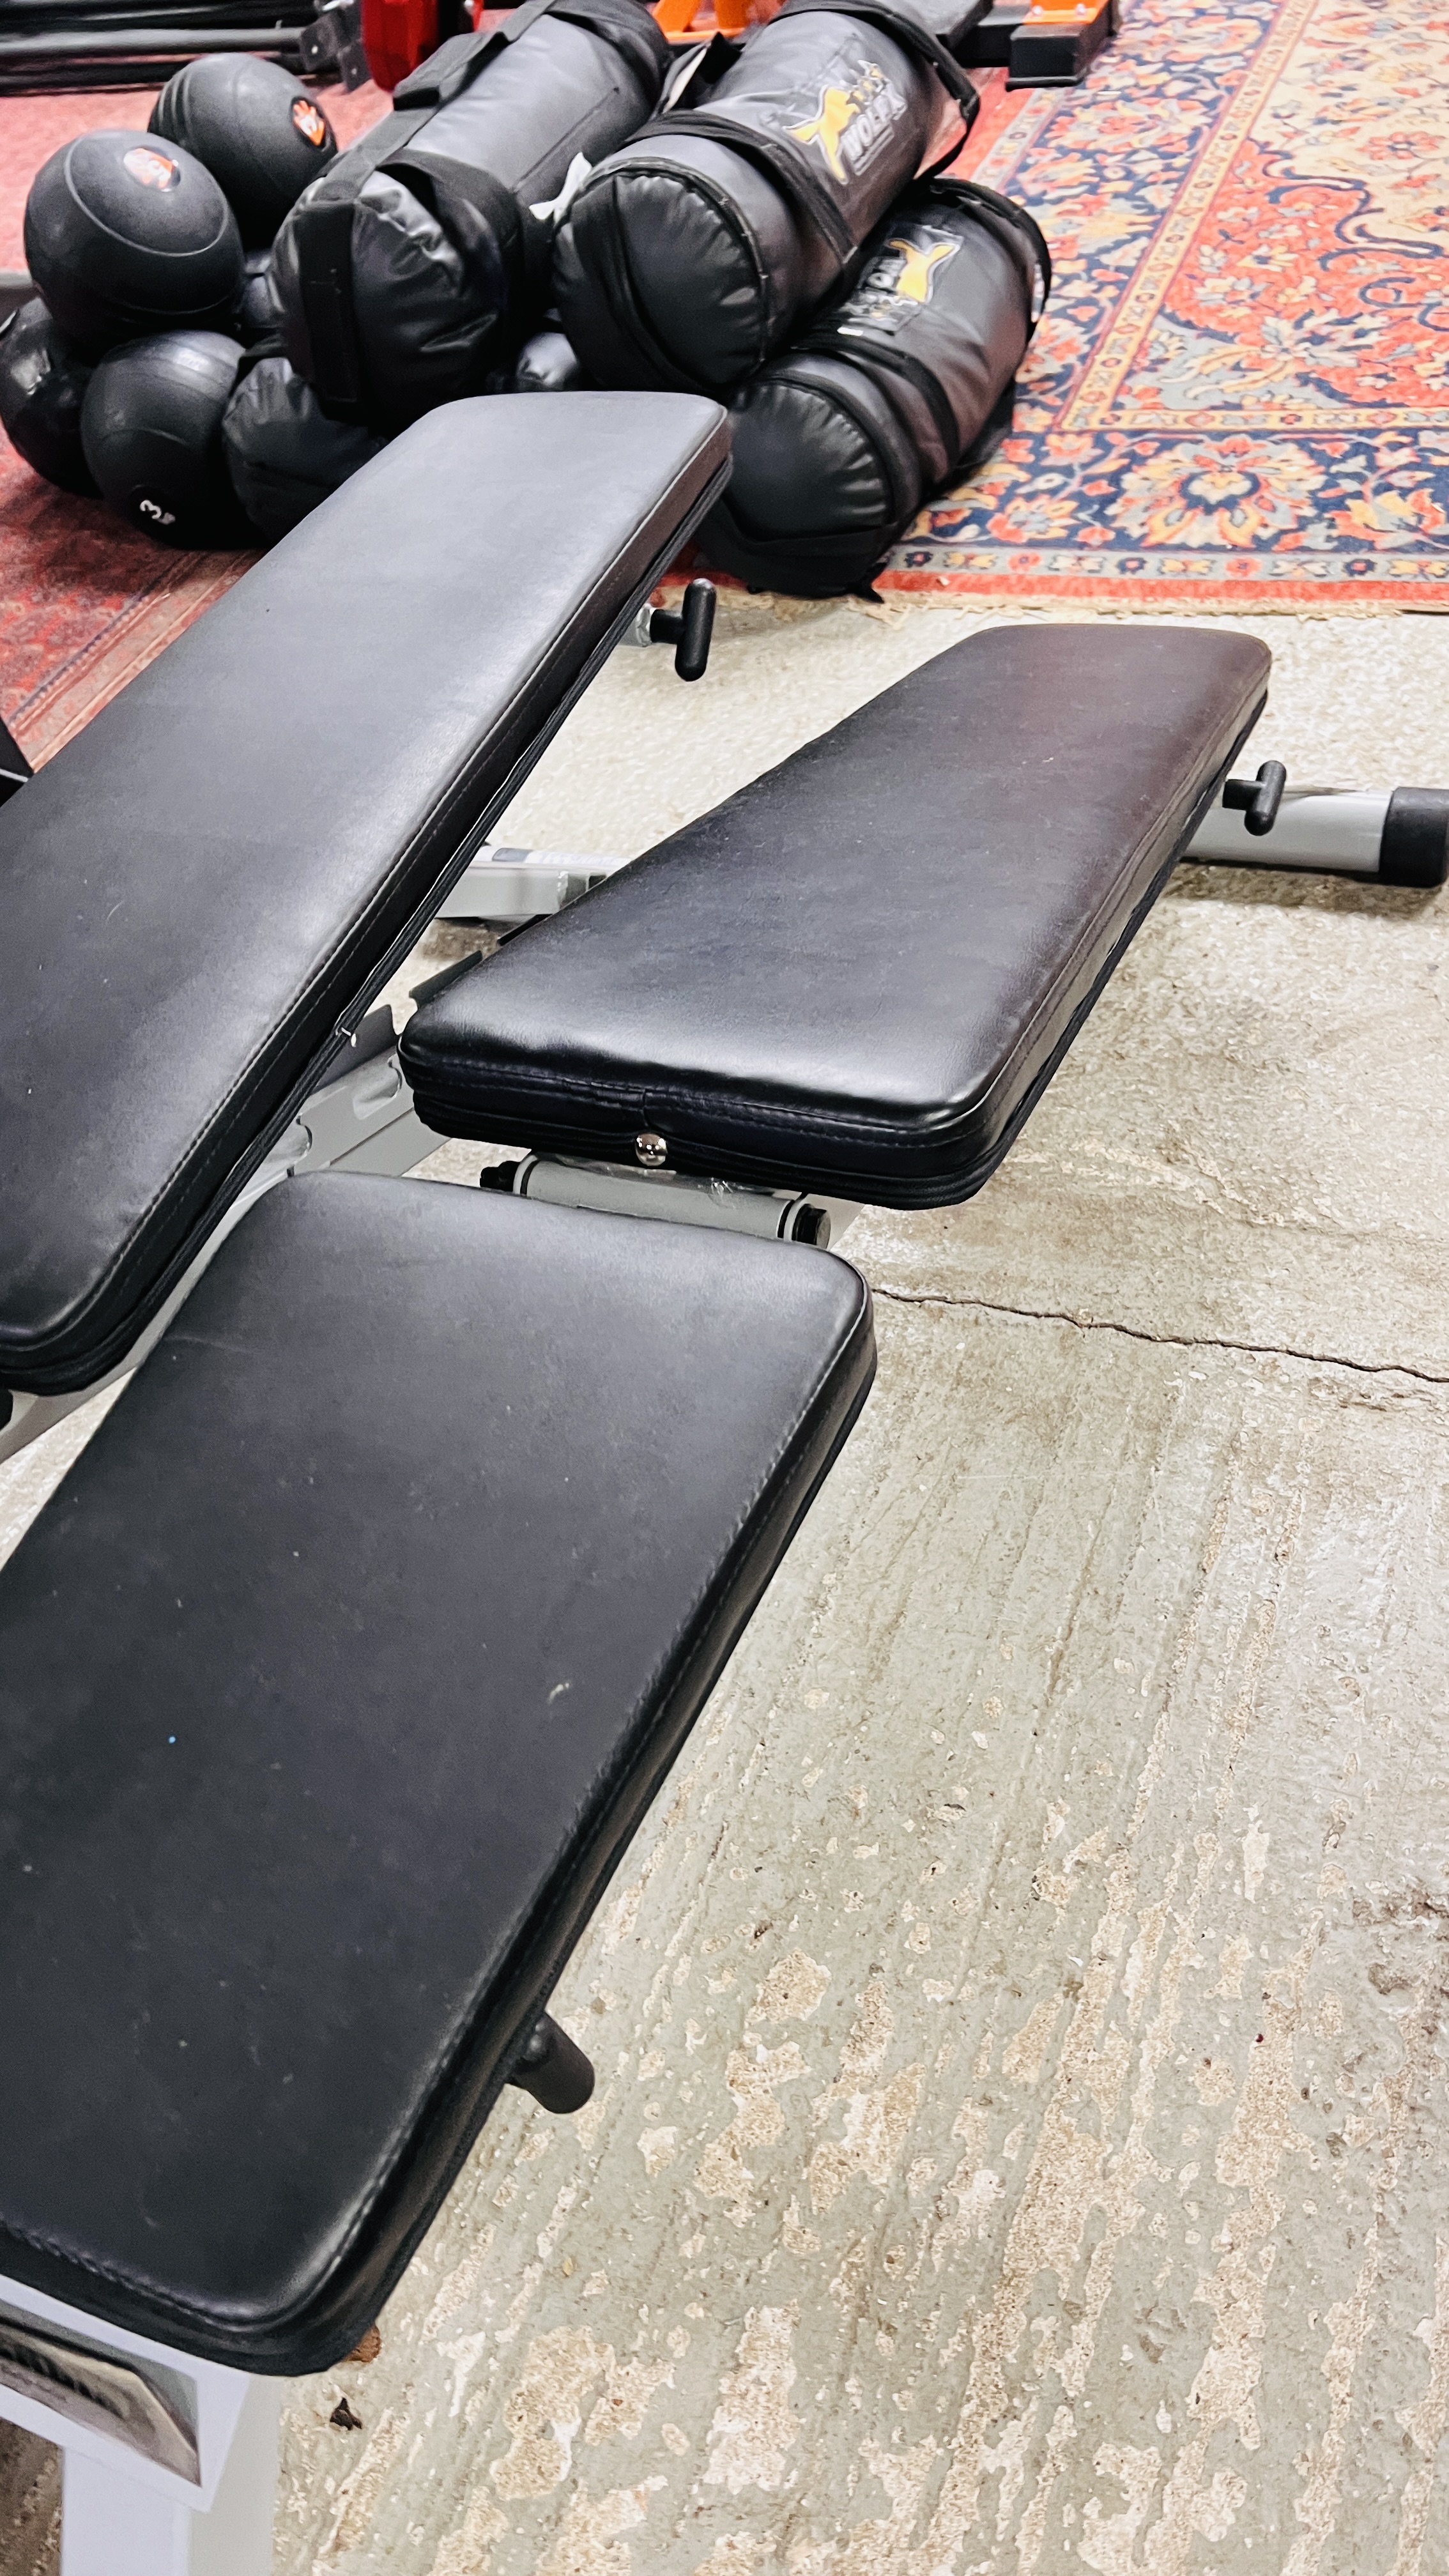 2 X POWERLINE EXERCISE BENCHES - SOLD AS SEEN - CONDITION OF SALE - EQUIPMENT HAS BEEN ASSEMBLED - Image 4 of 4